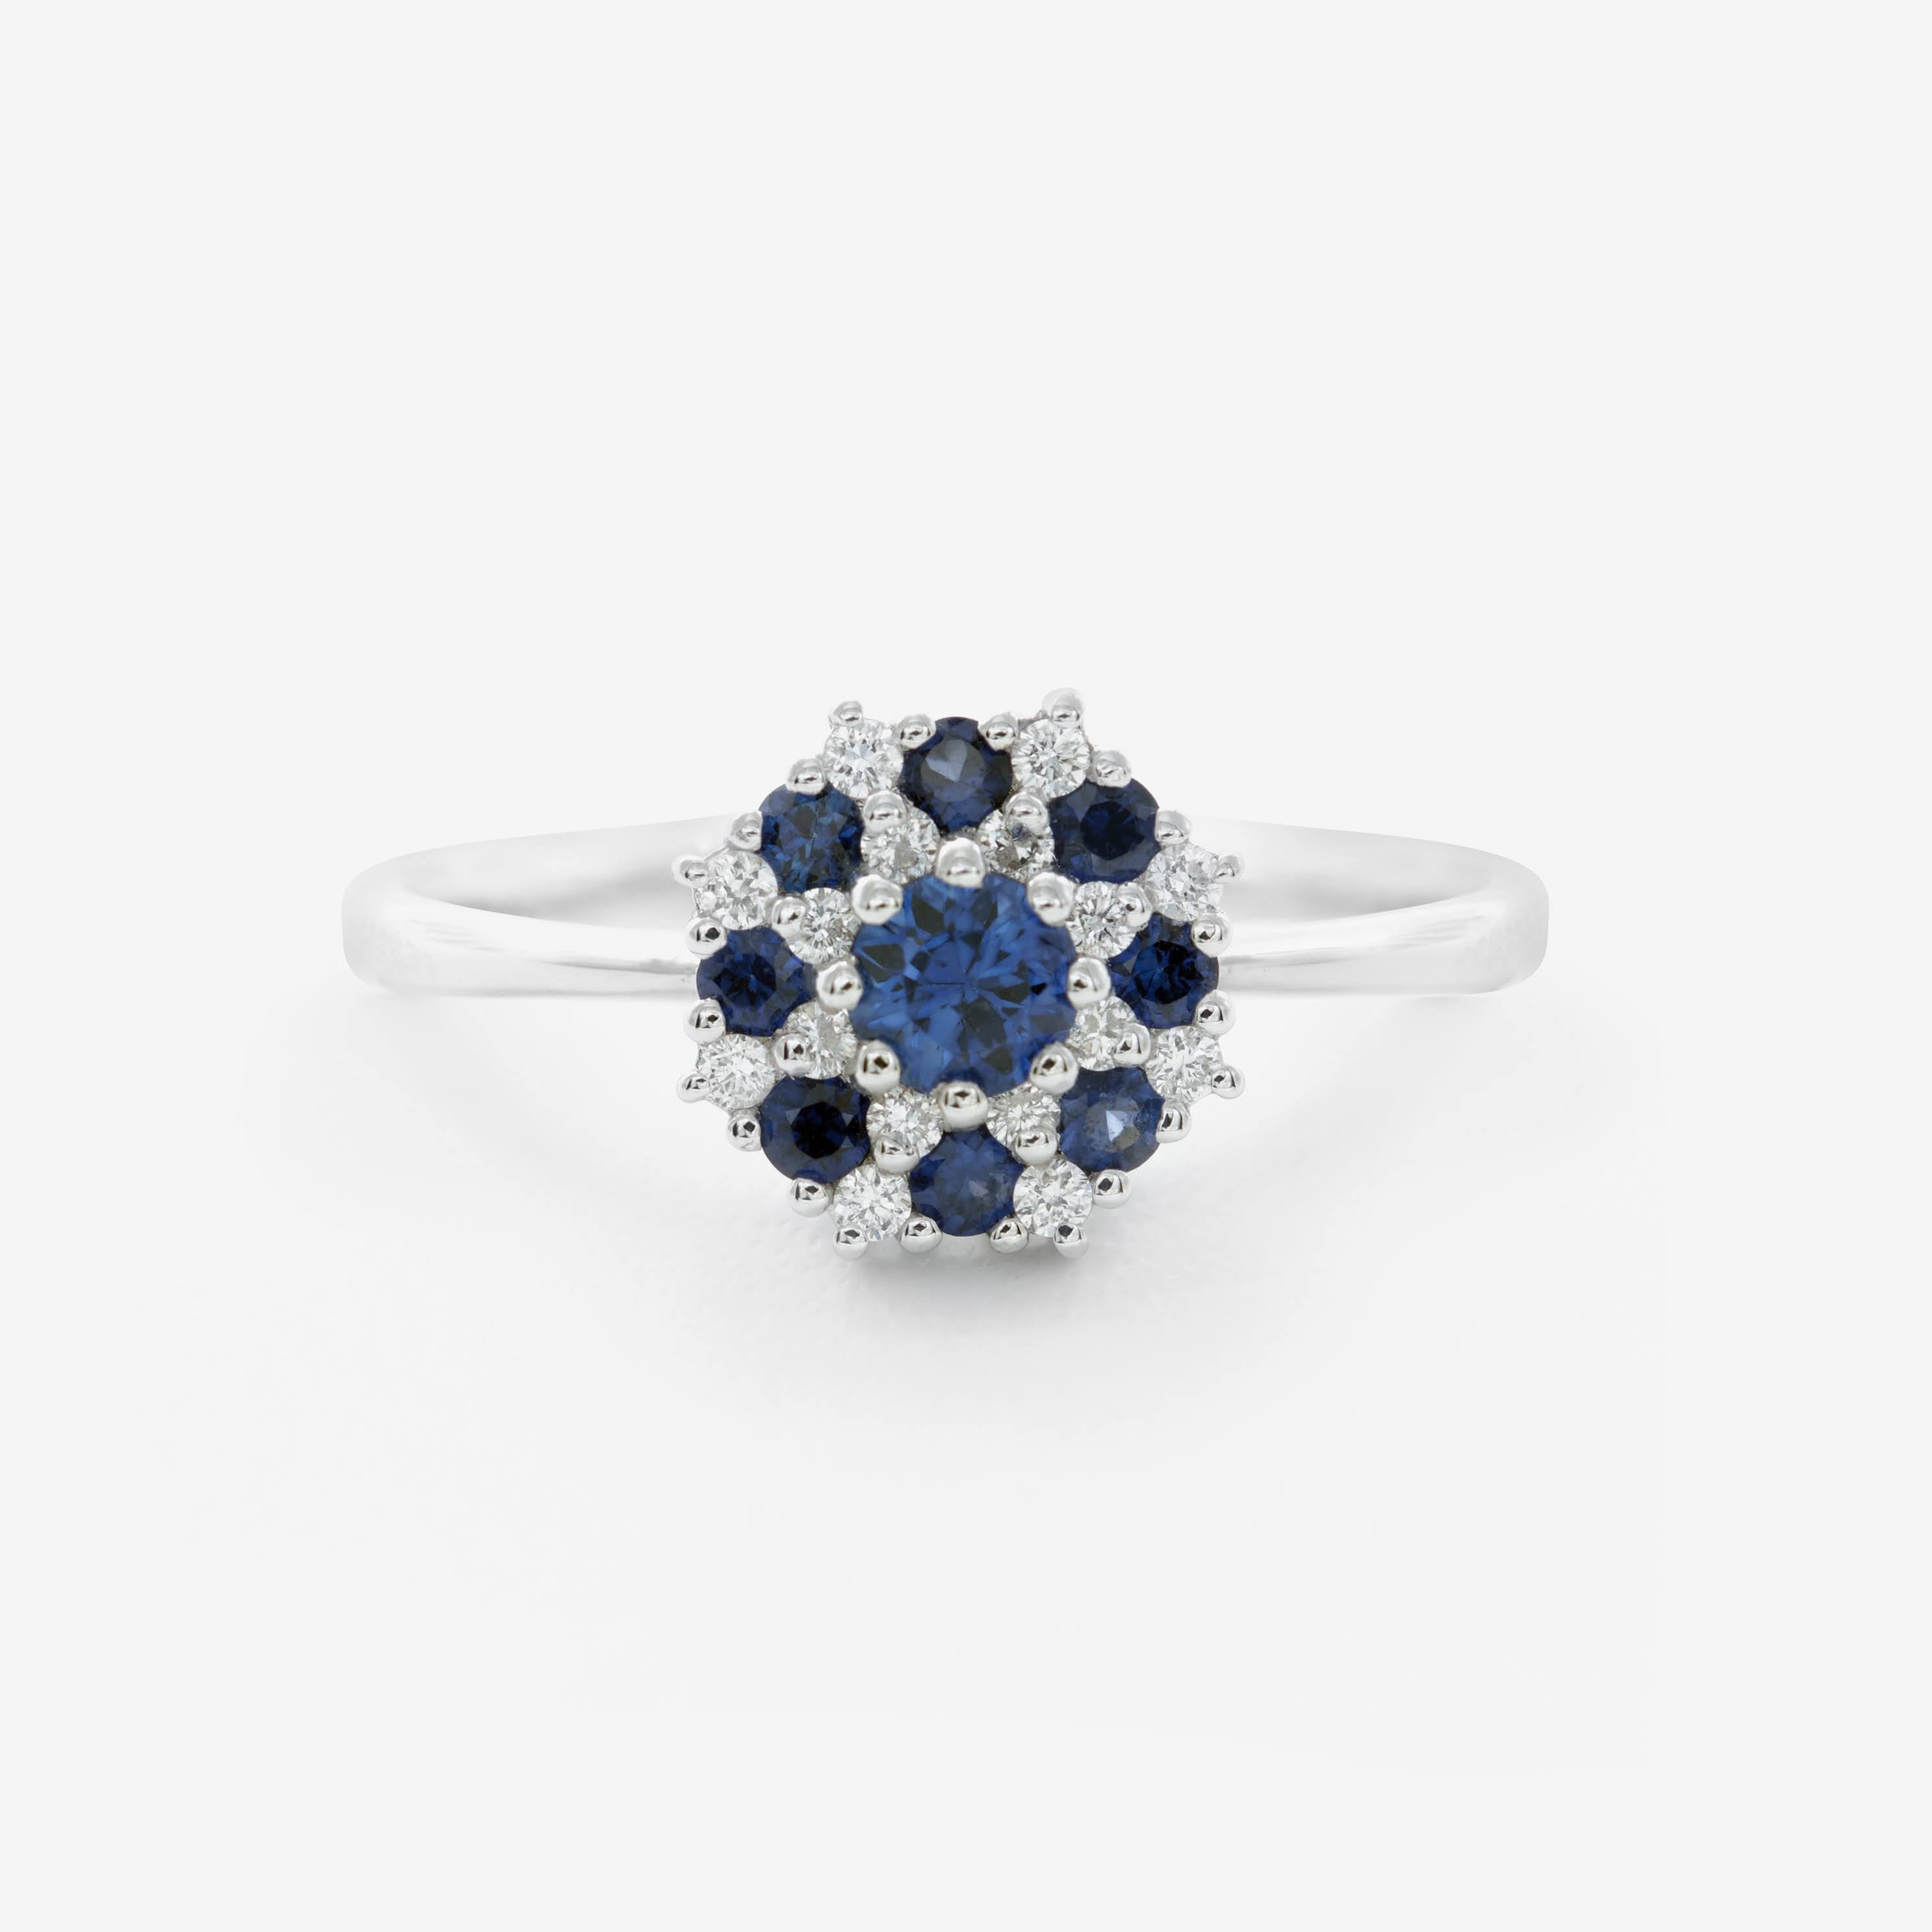 Sapphire Peony ring with diamonds and sapphires